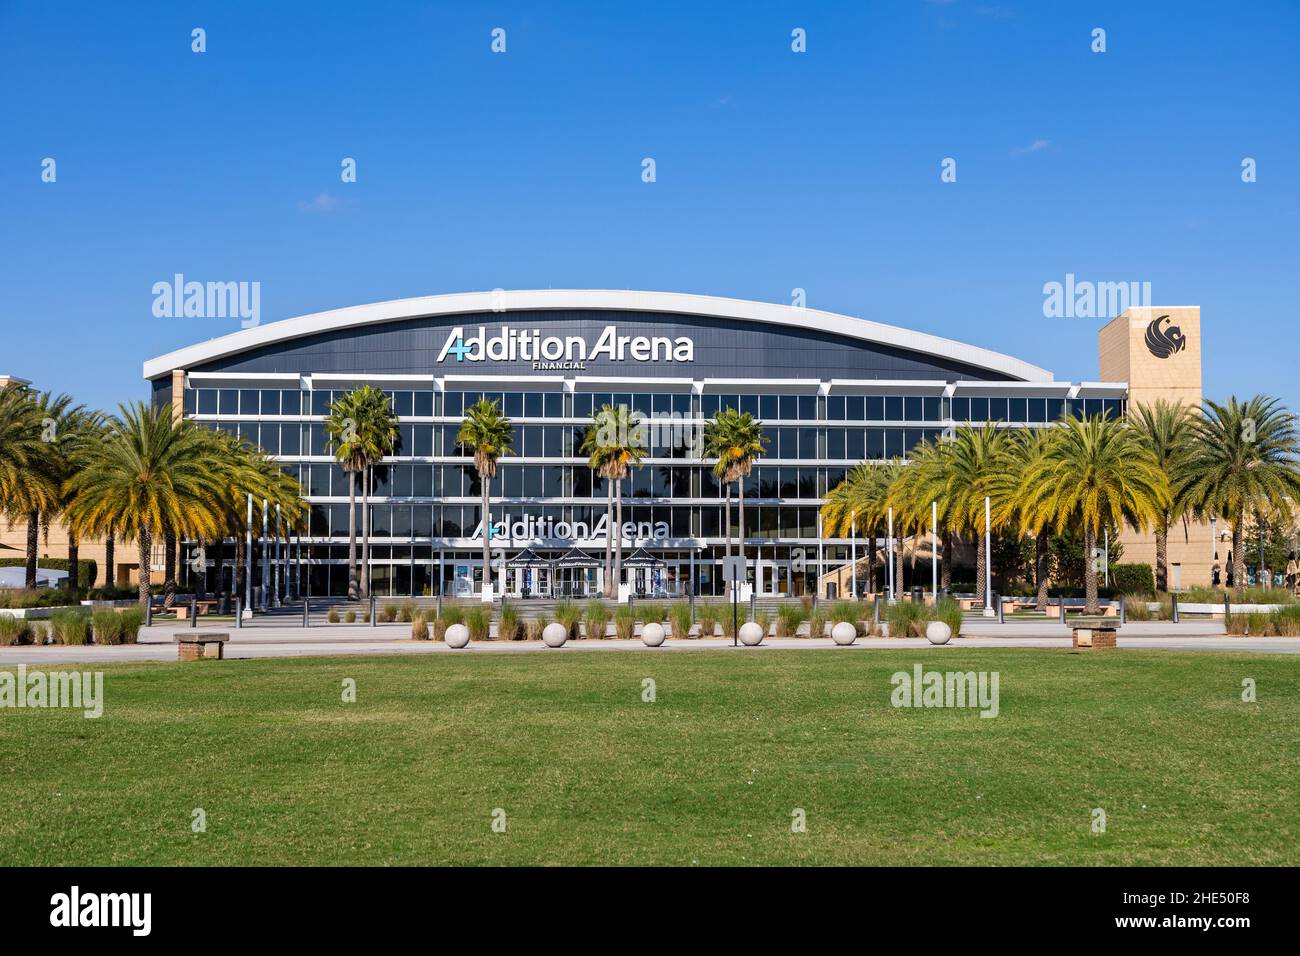 Orlando, FL - December 30, 2021: The Addition Financial Arena on the University of Central Florida campus. Stock Photo